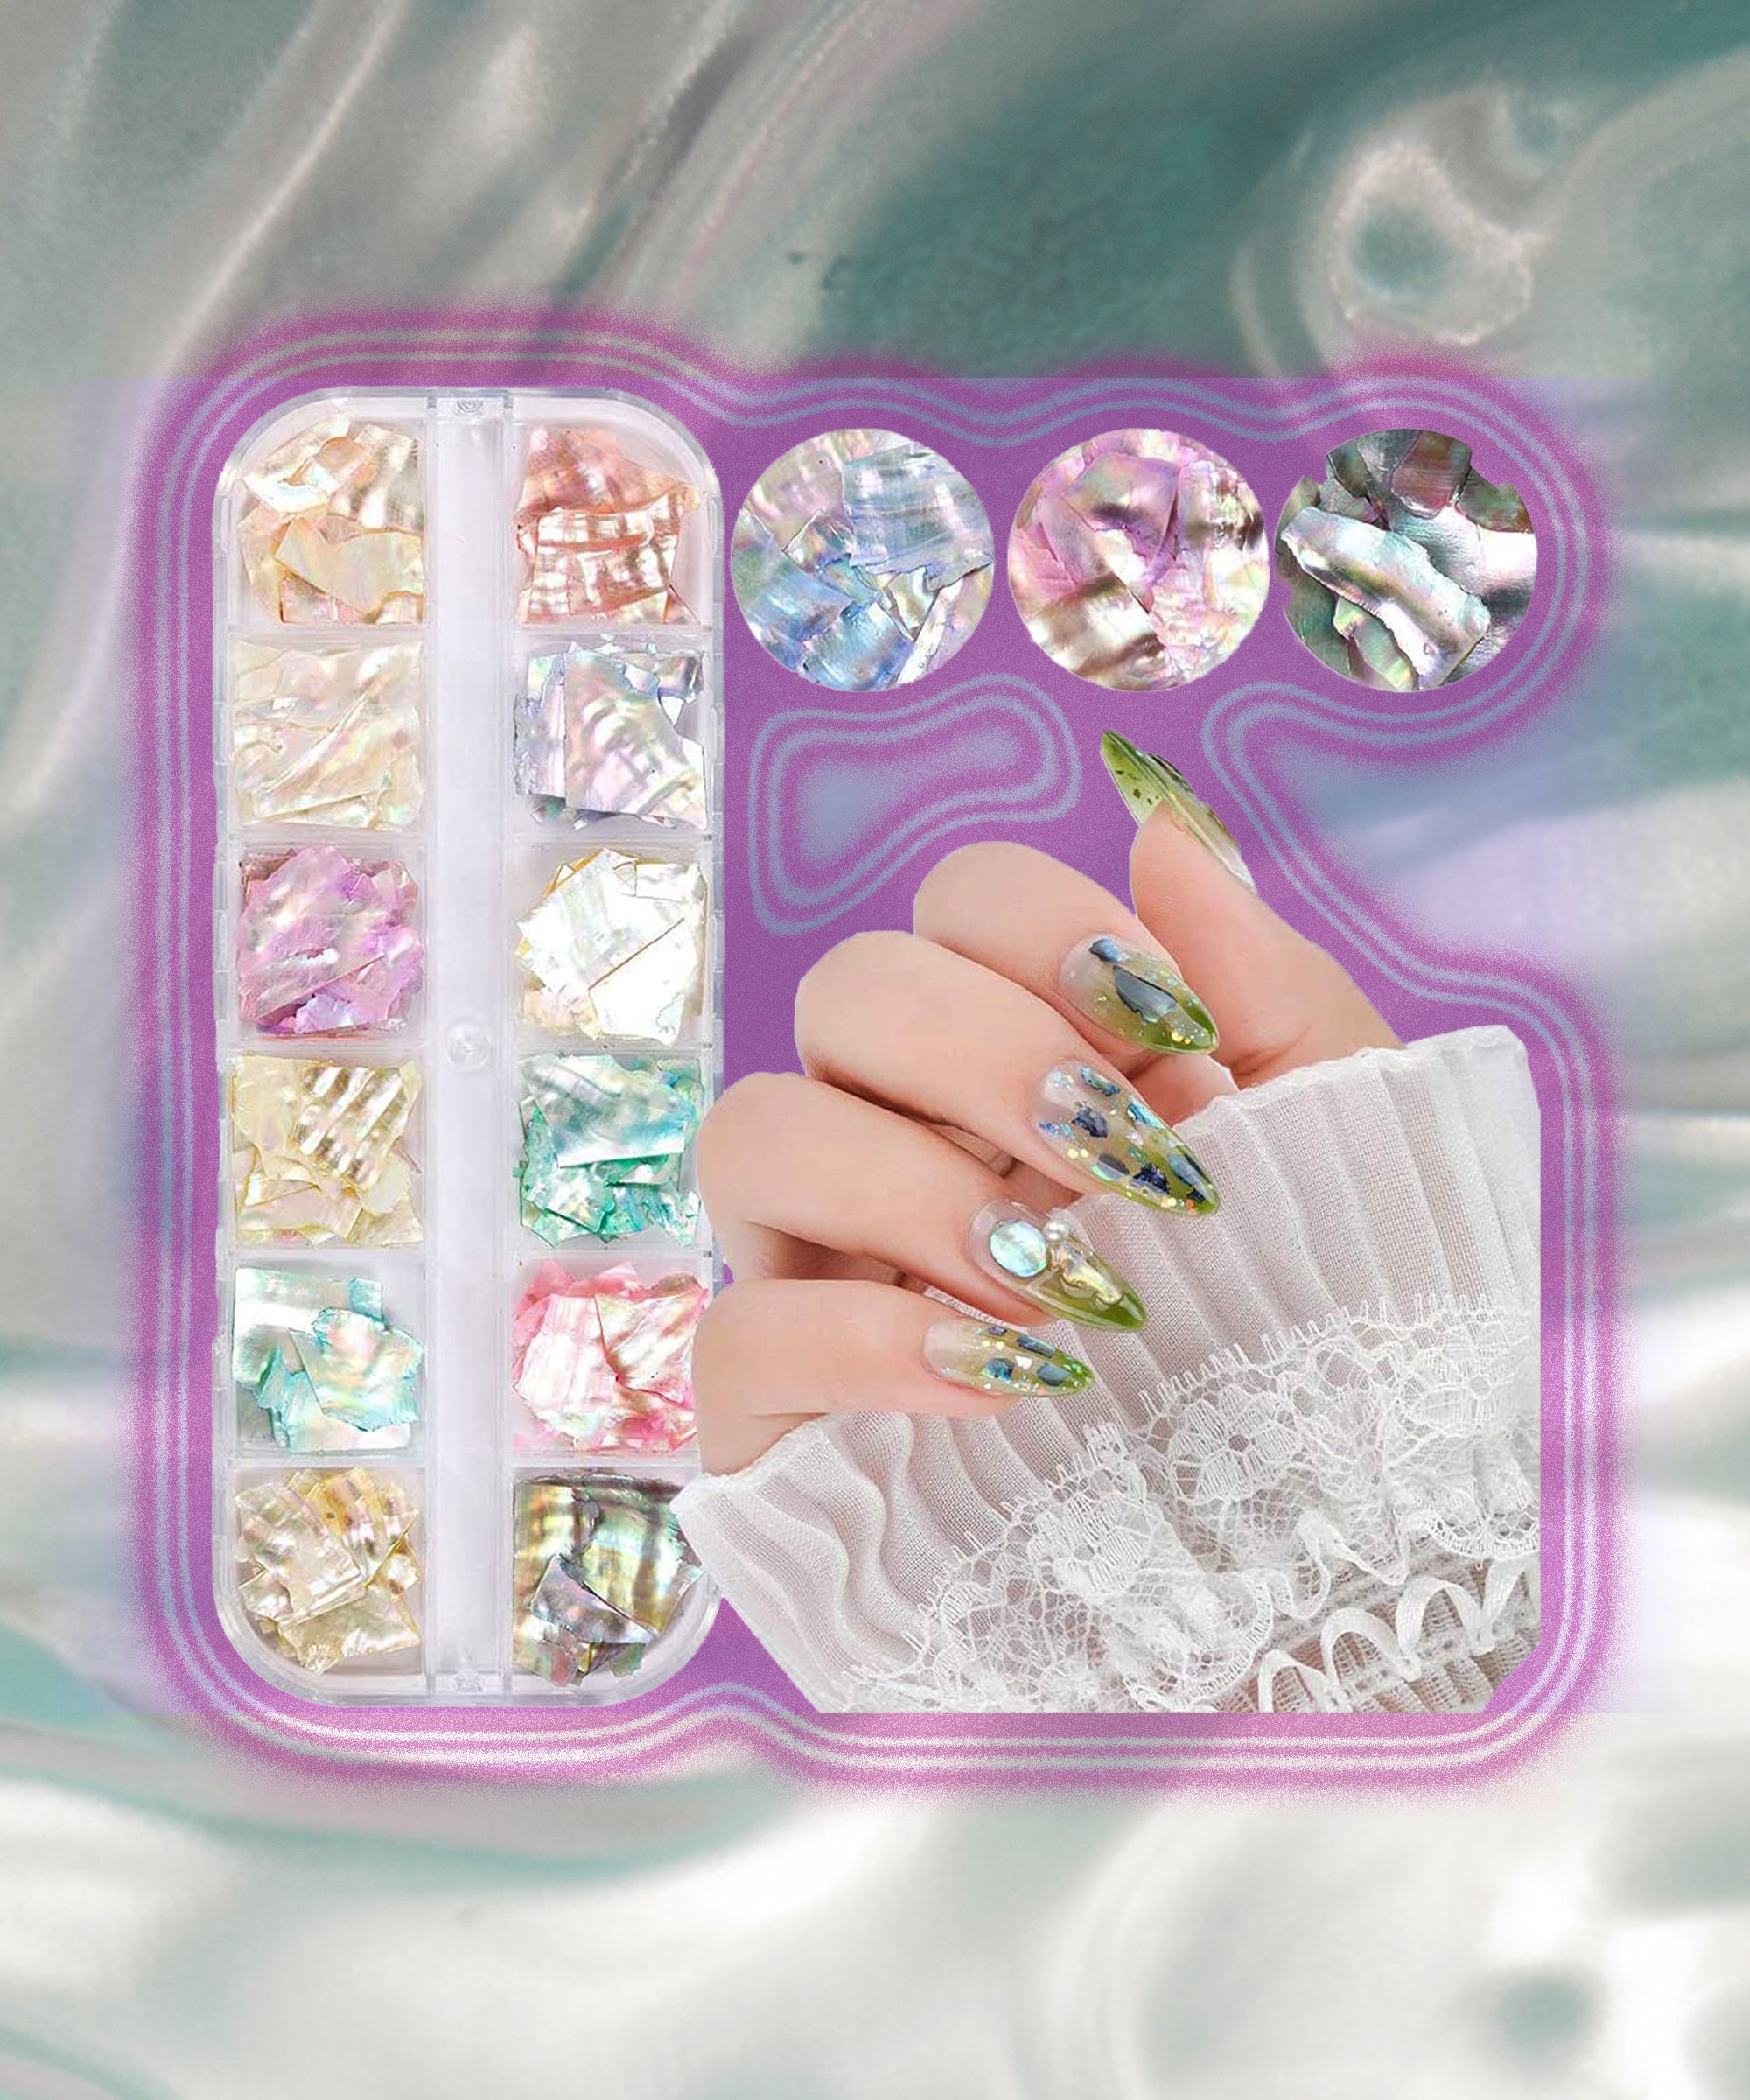 The 25 Best Mermaid Nail Accessories on